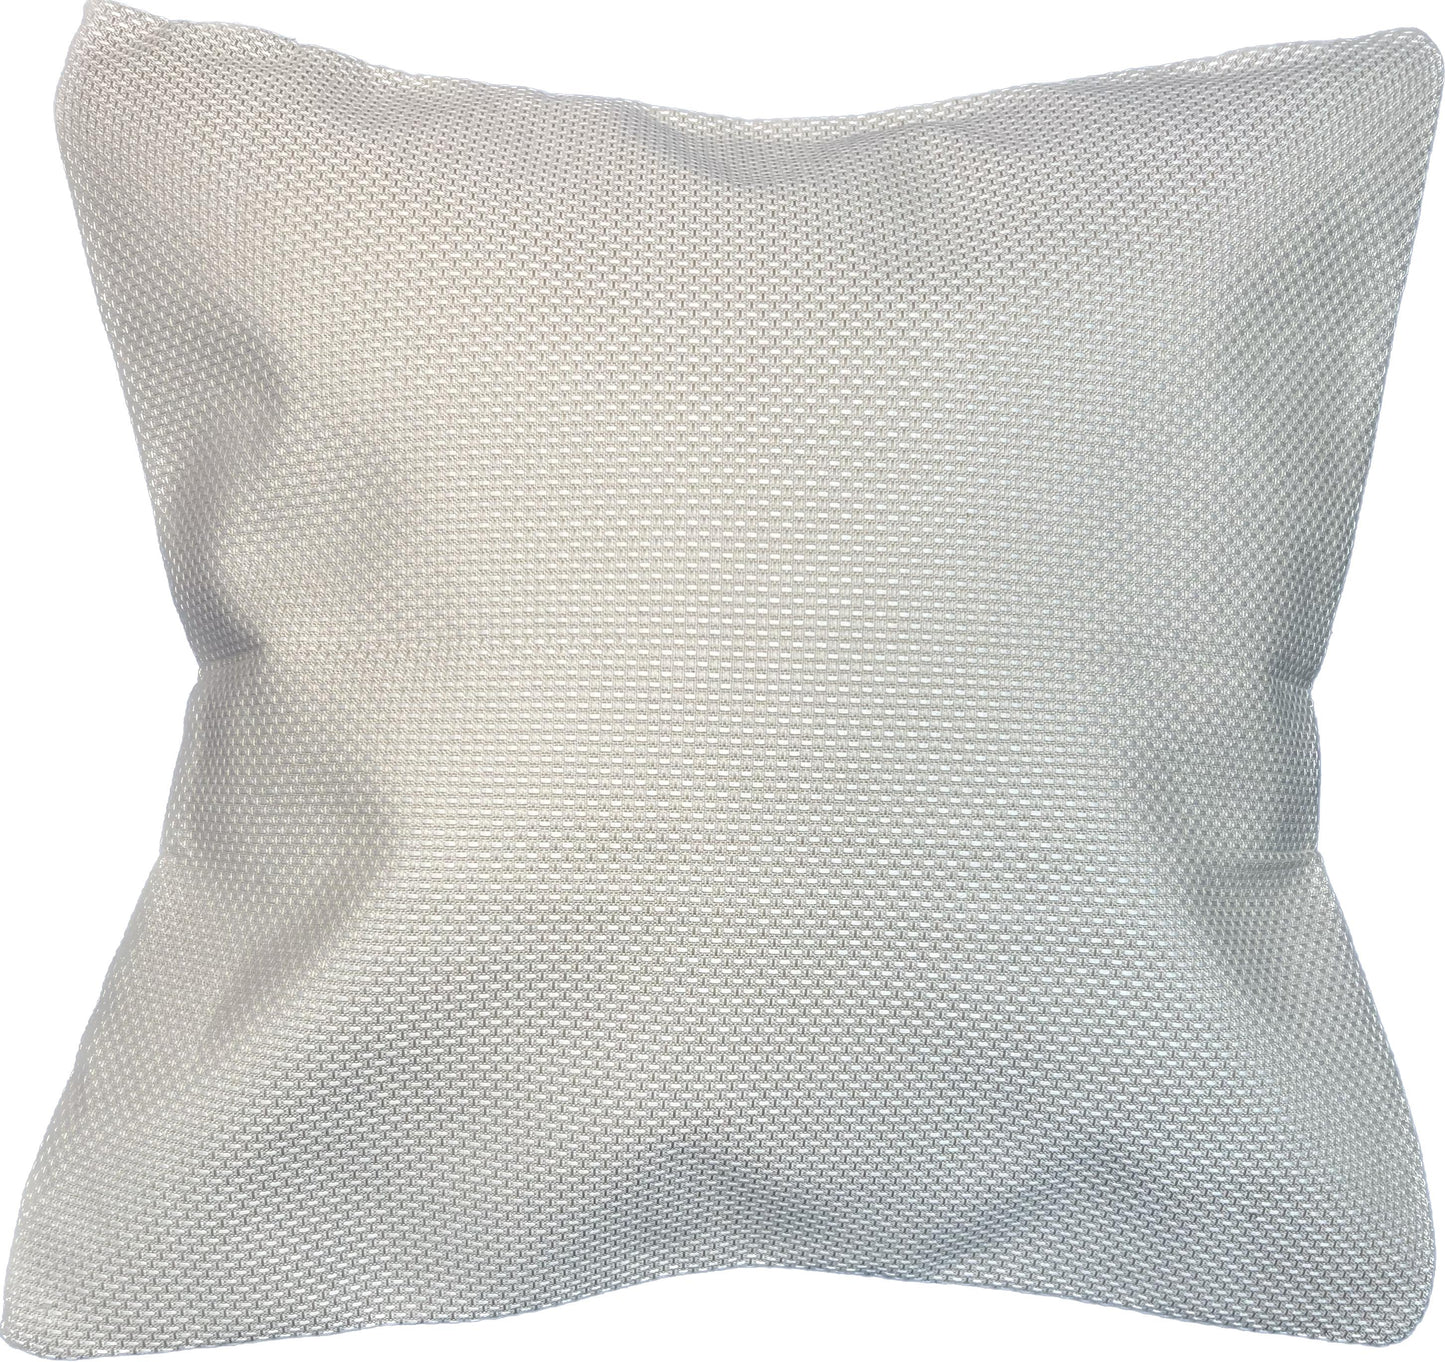 20"x20" Textured Pillow Cover